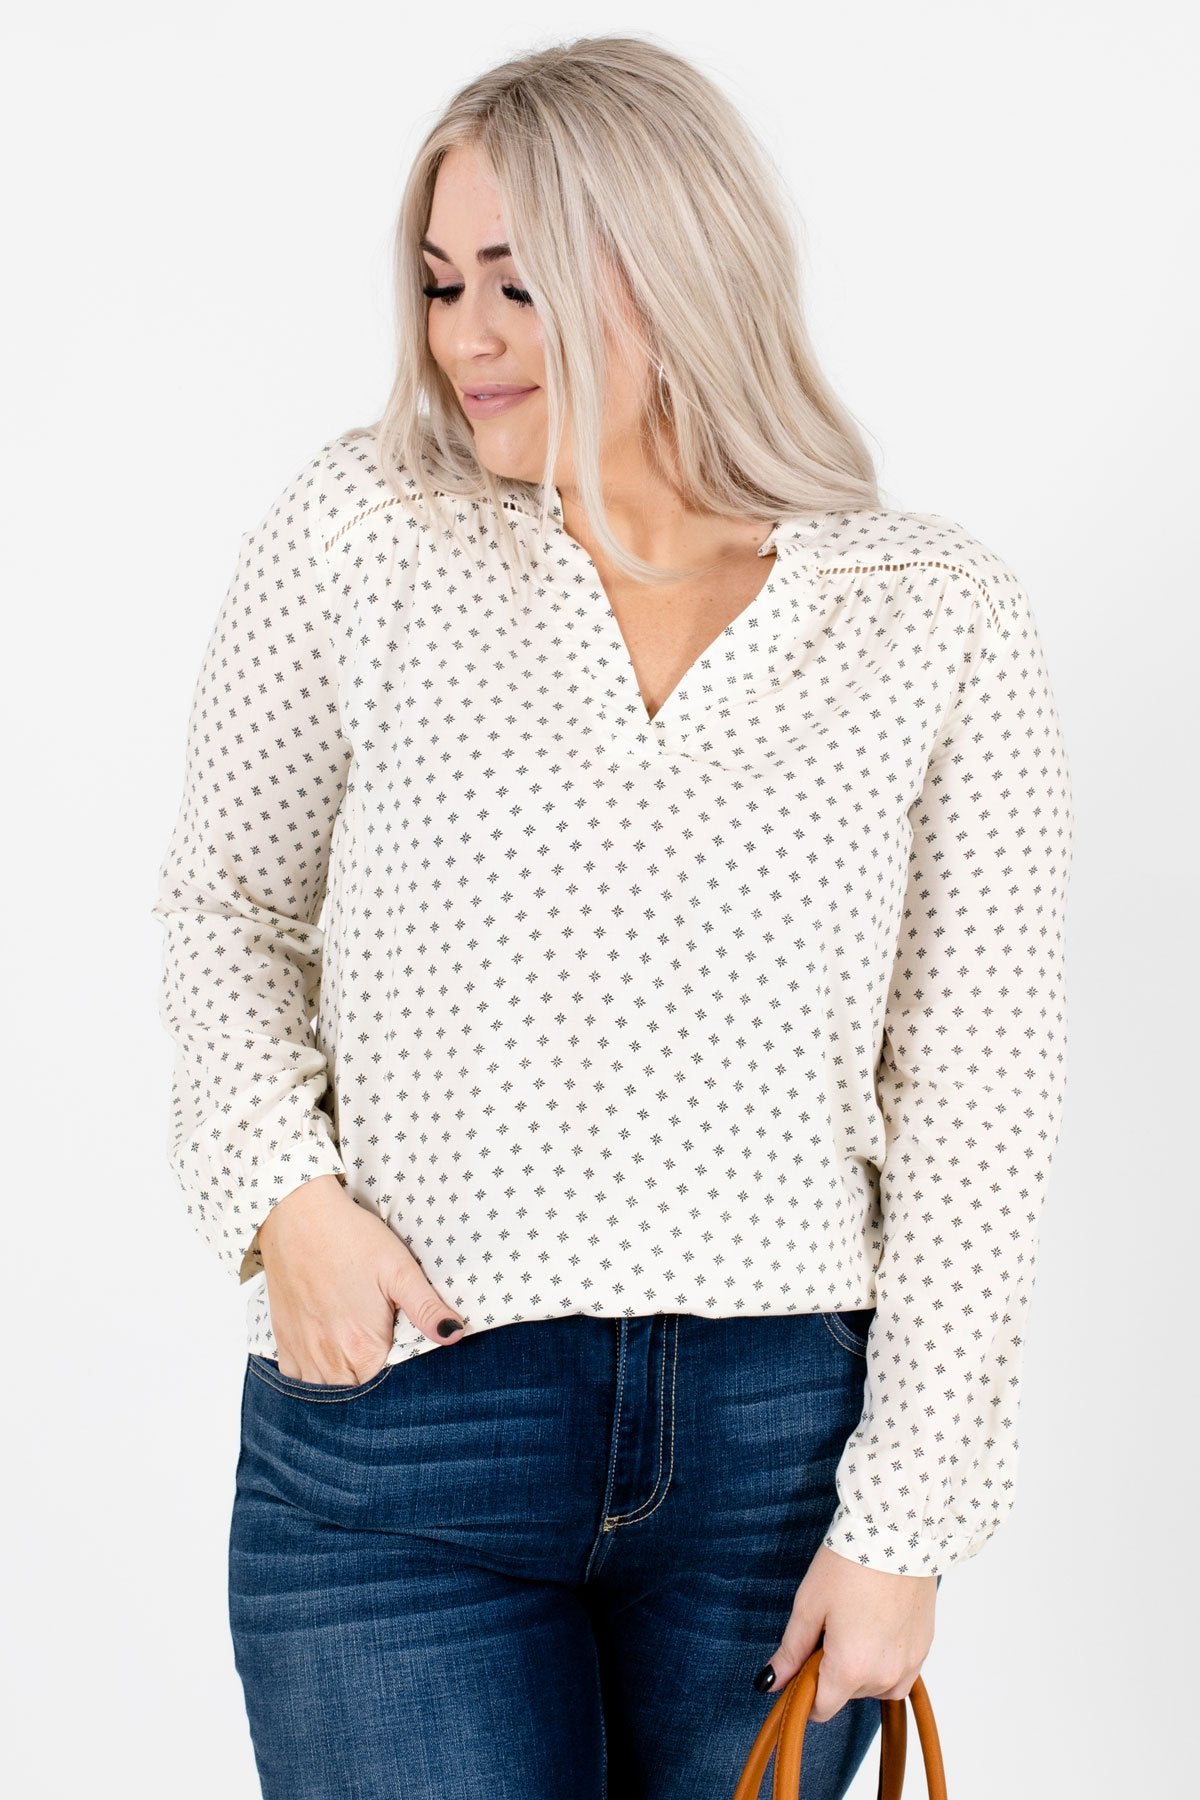 Cream and Black Geometric Patterned Boutique Blouses for Women